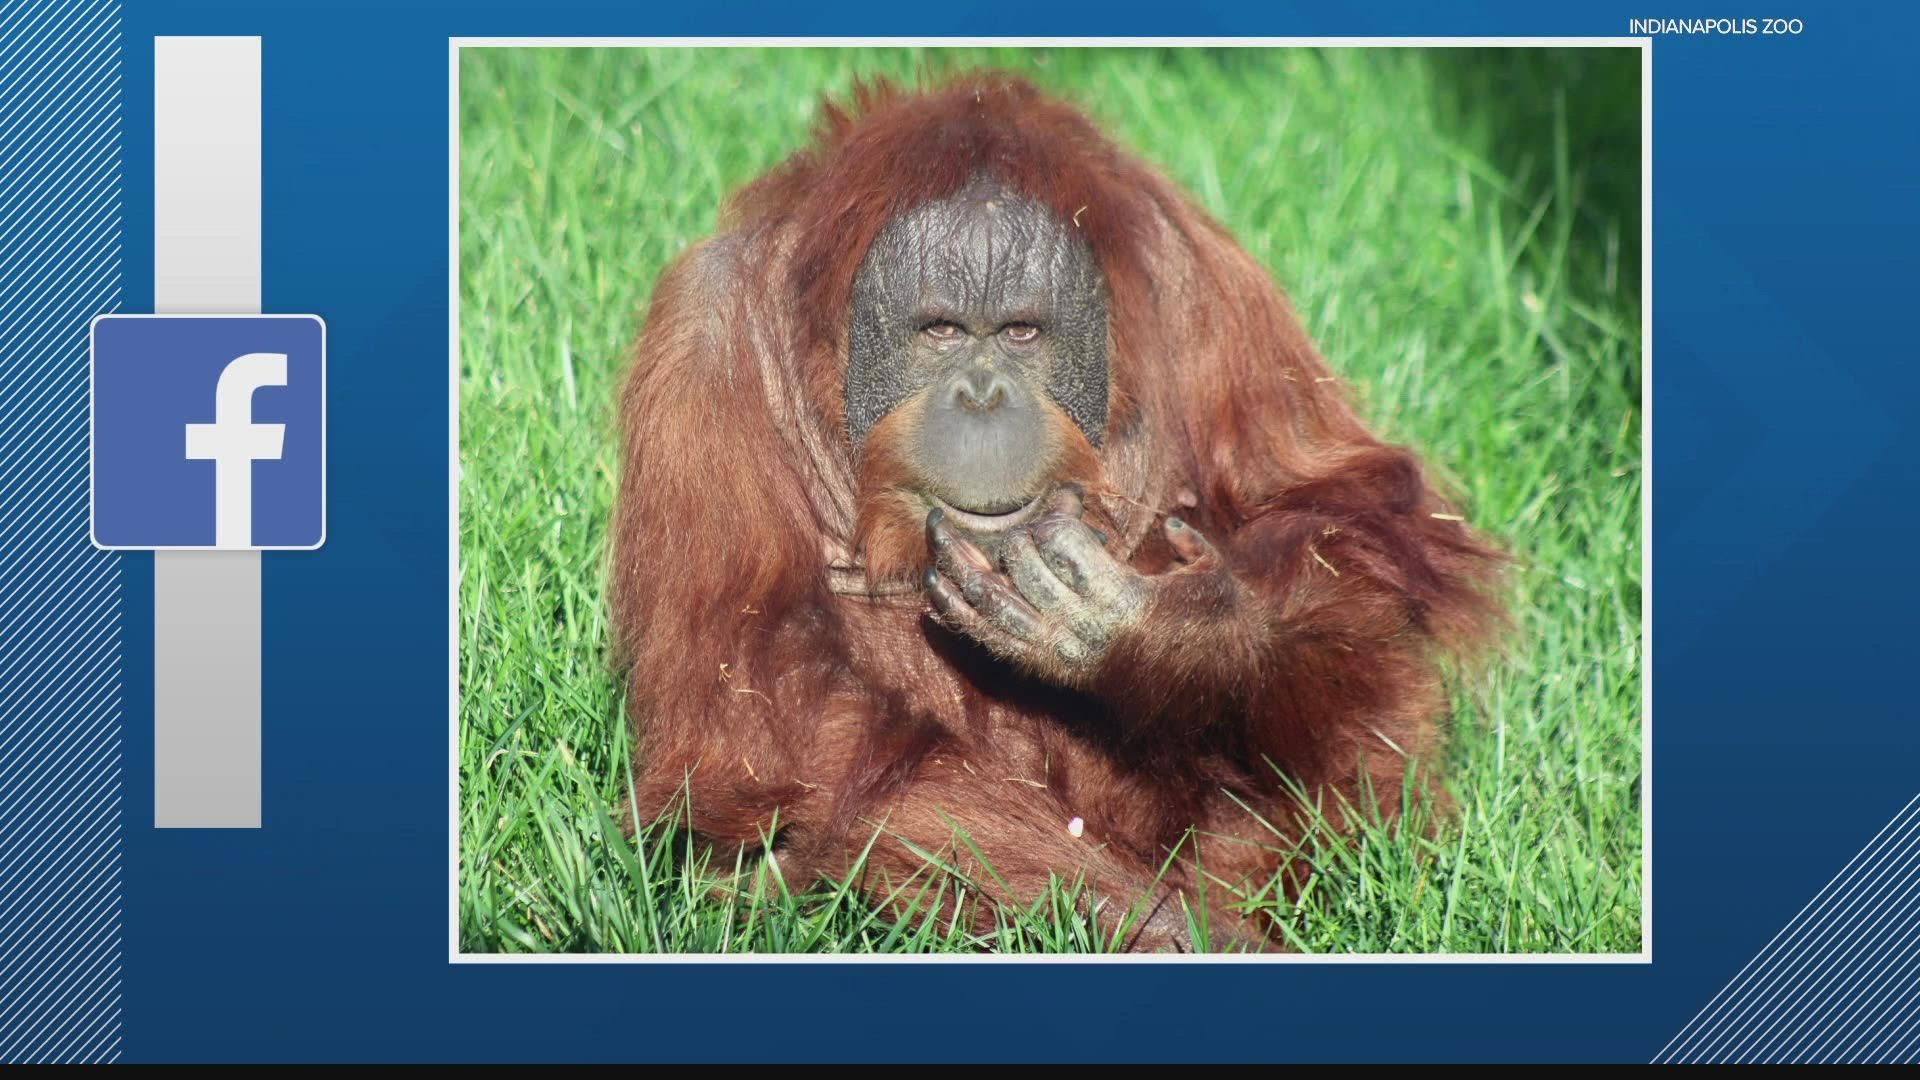 The Indianapolis Zoo is mourning the death of one of its orangutans.